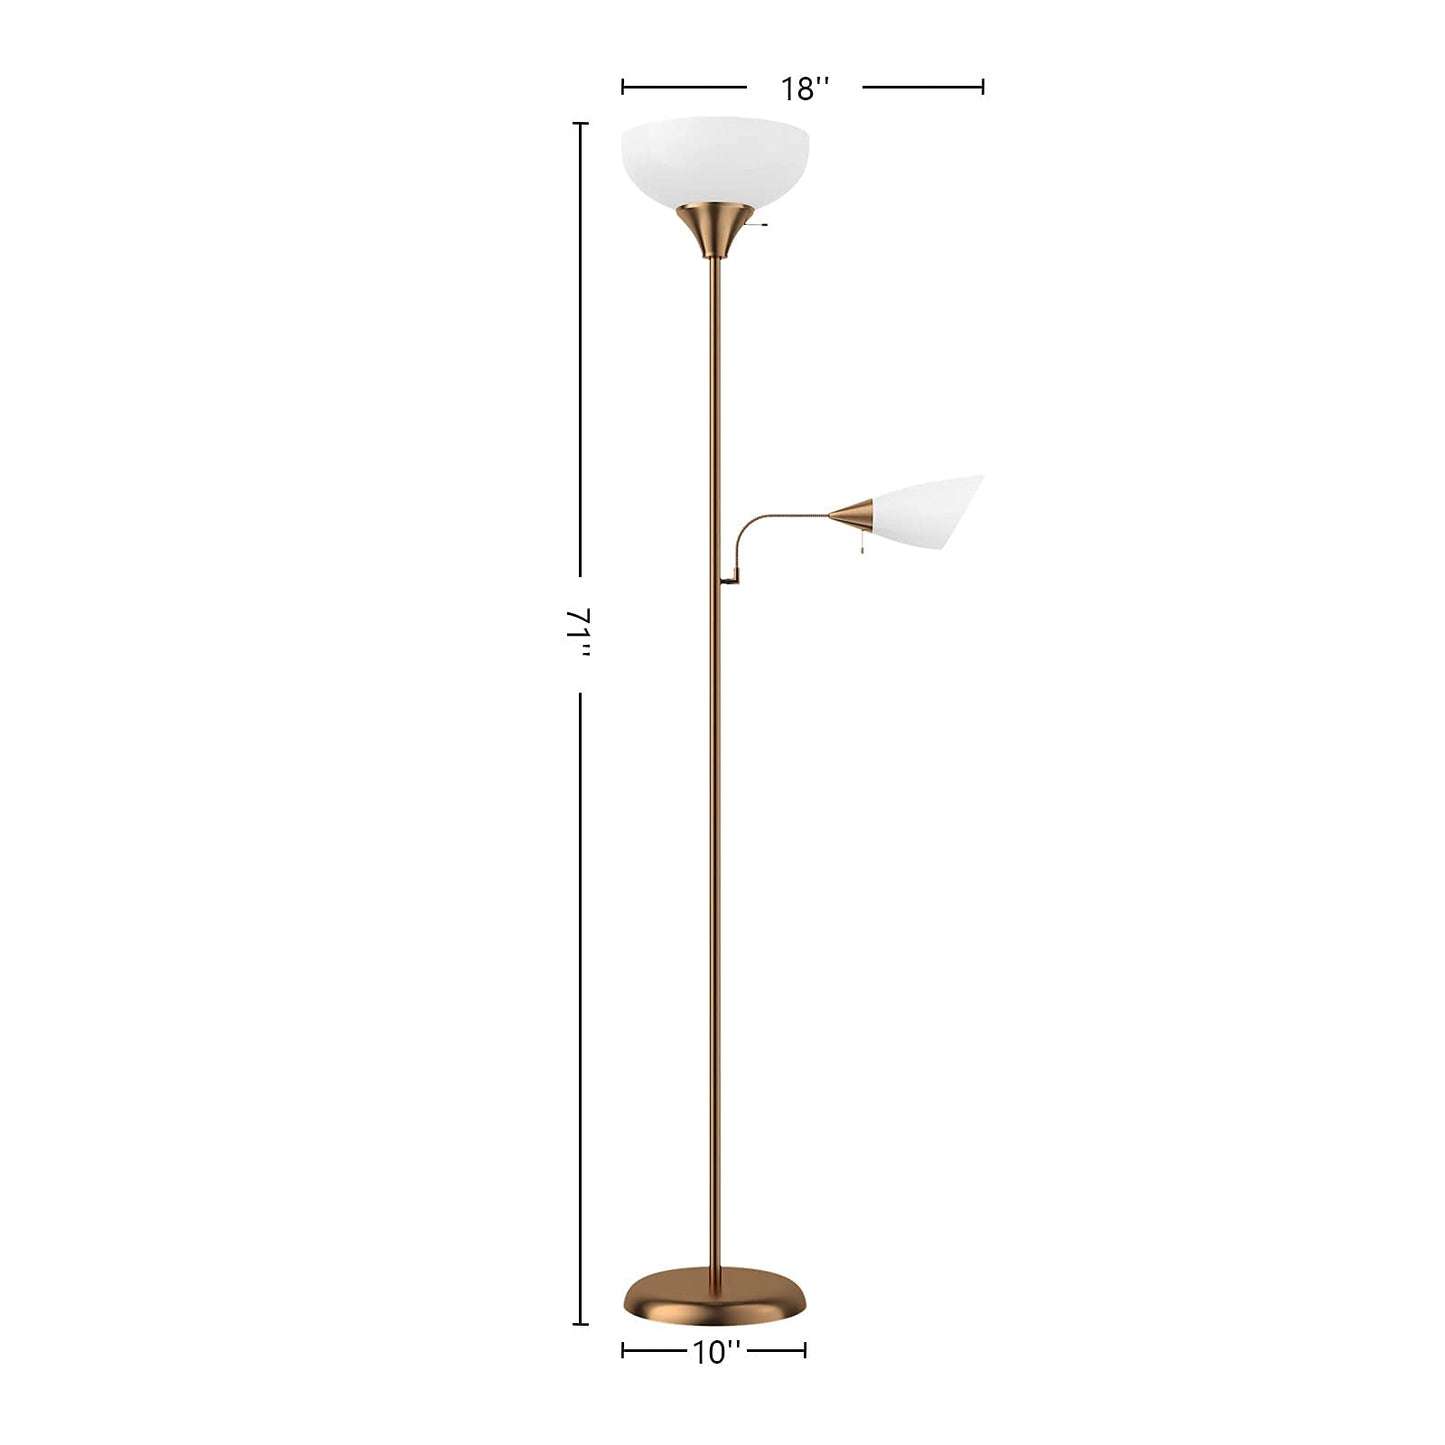 ZJmikia Floor Lamp, 12W Standing Lamp for Living Room/ Bedroom, 71" Modern Tall Lamp with 9W Adjustable Floor Reading Lamp, Torchiere Floor Lamps Standing Floor Lamp with LED Bulbs - Like New